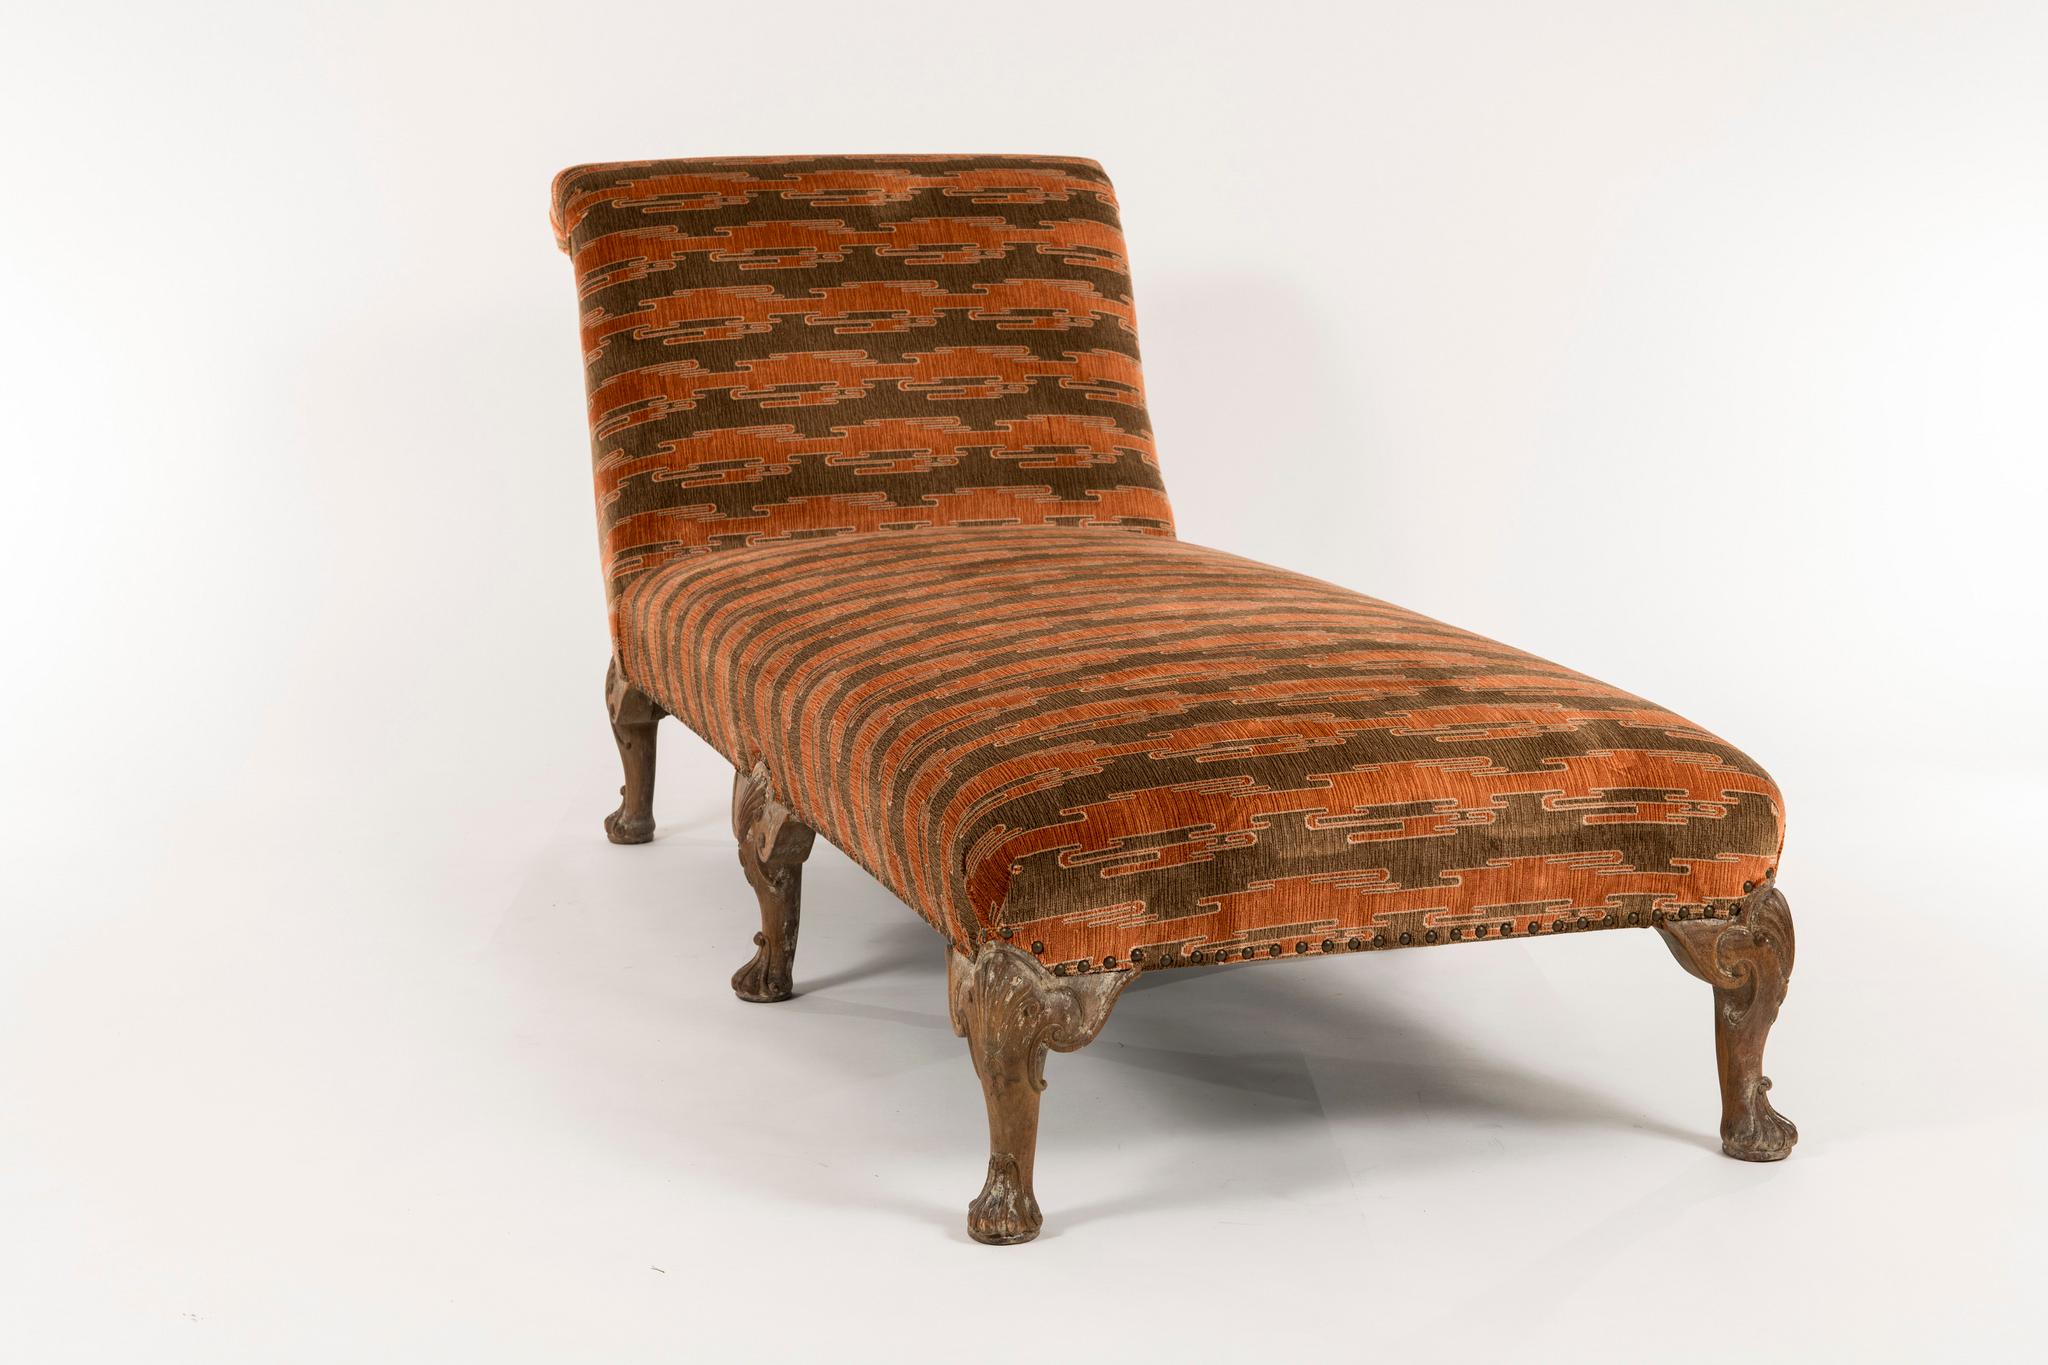 A wonderful carved early 20th century Regency style chaise newly upholstered in a contemporary Kelly Wearstler velvet chenille.